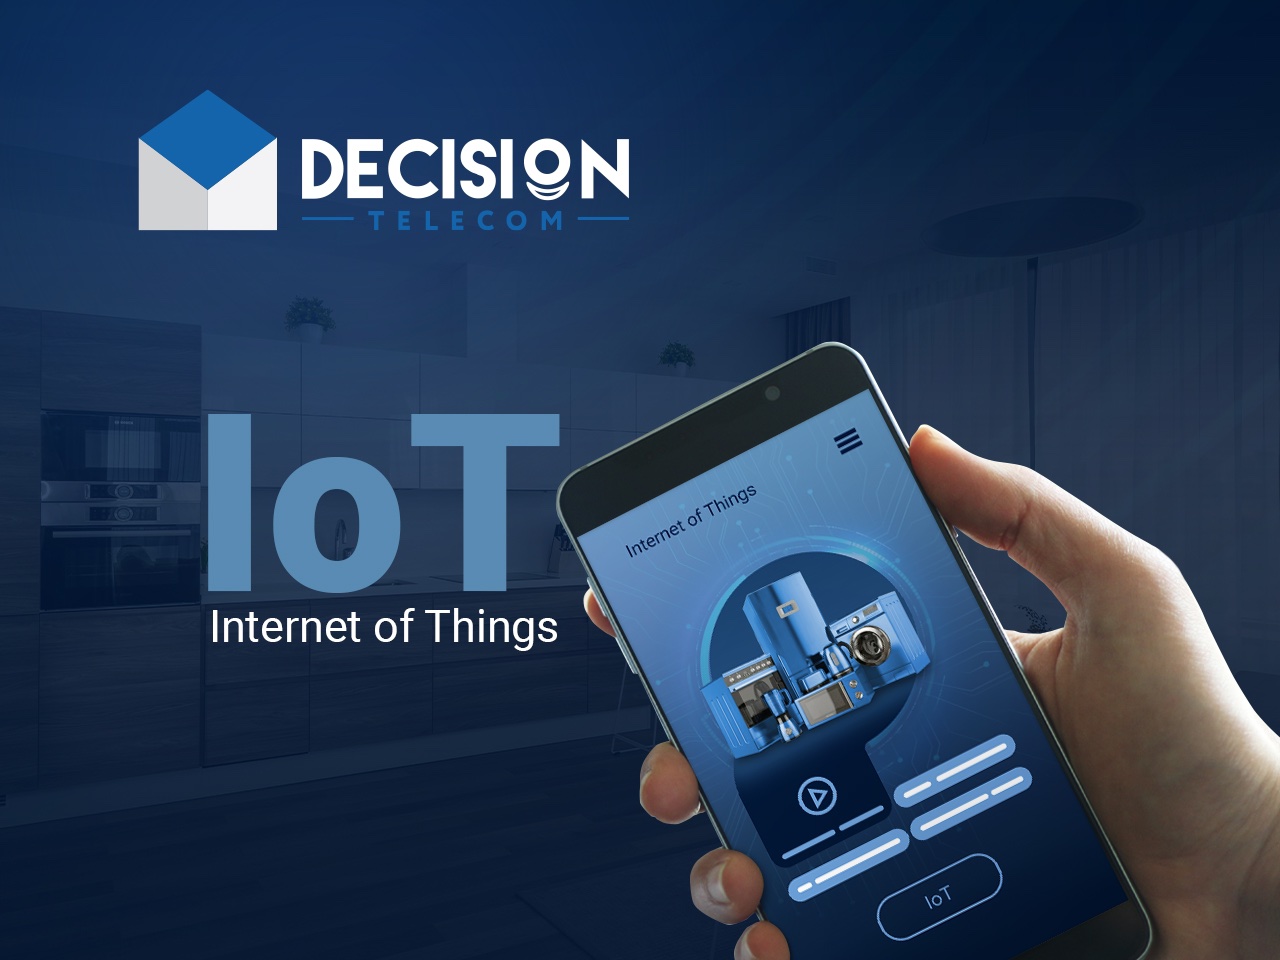 IoT technology and the horizons it opens up for business